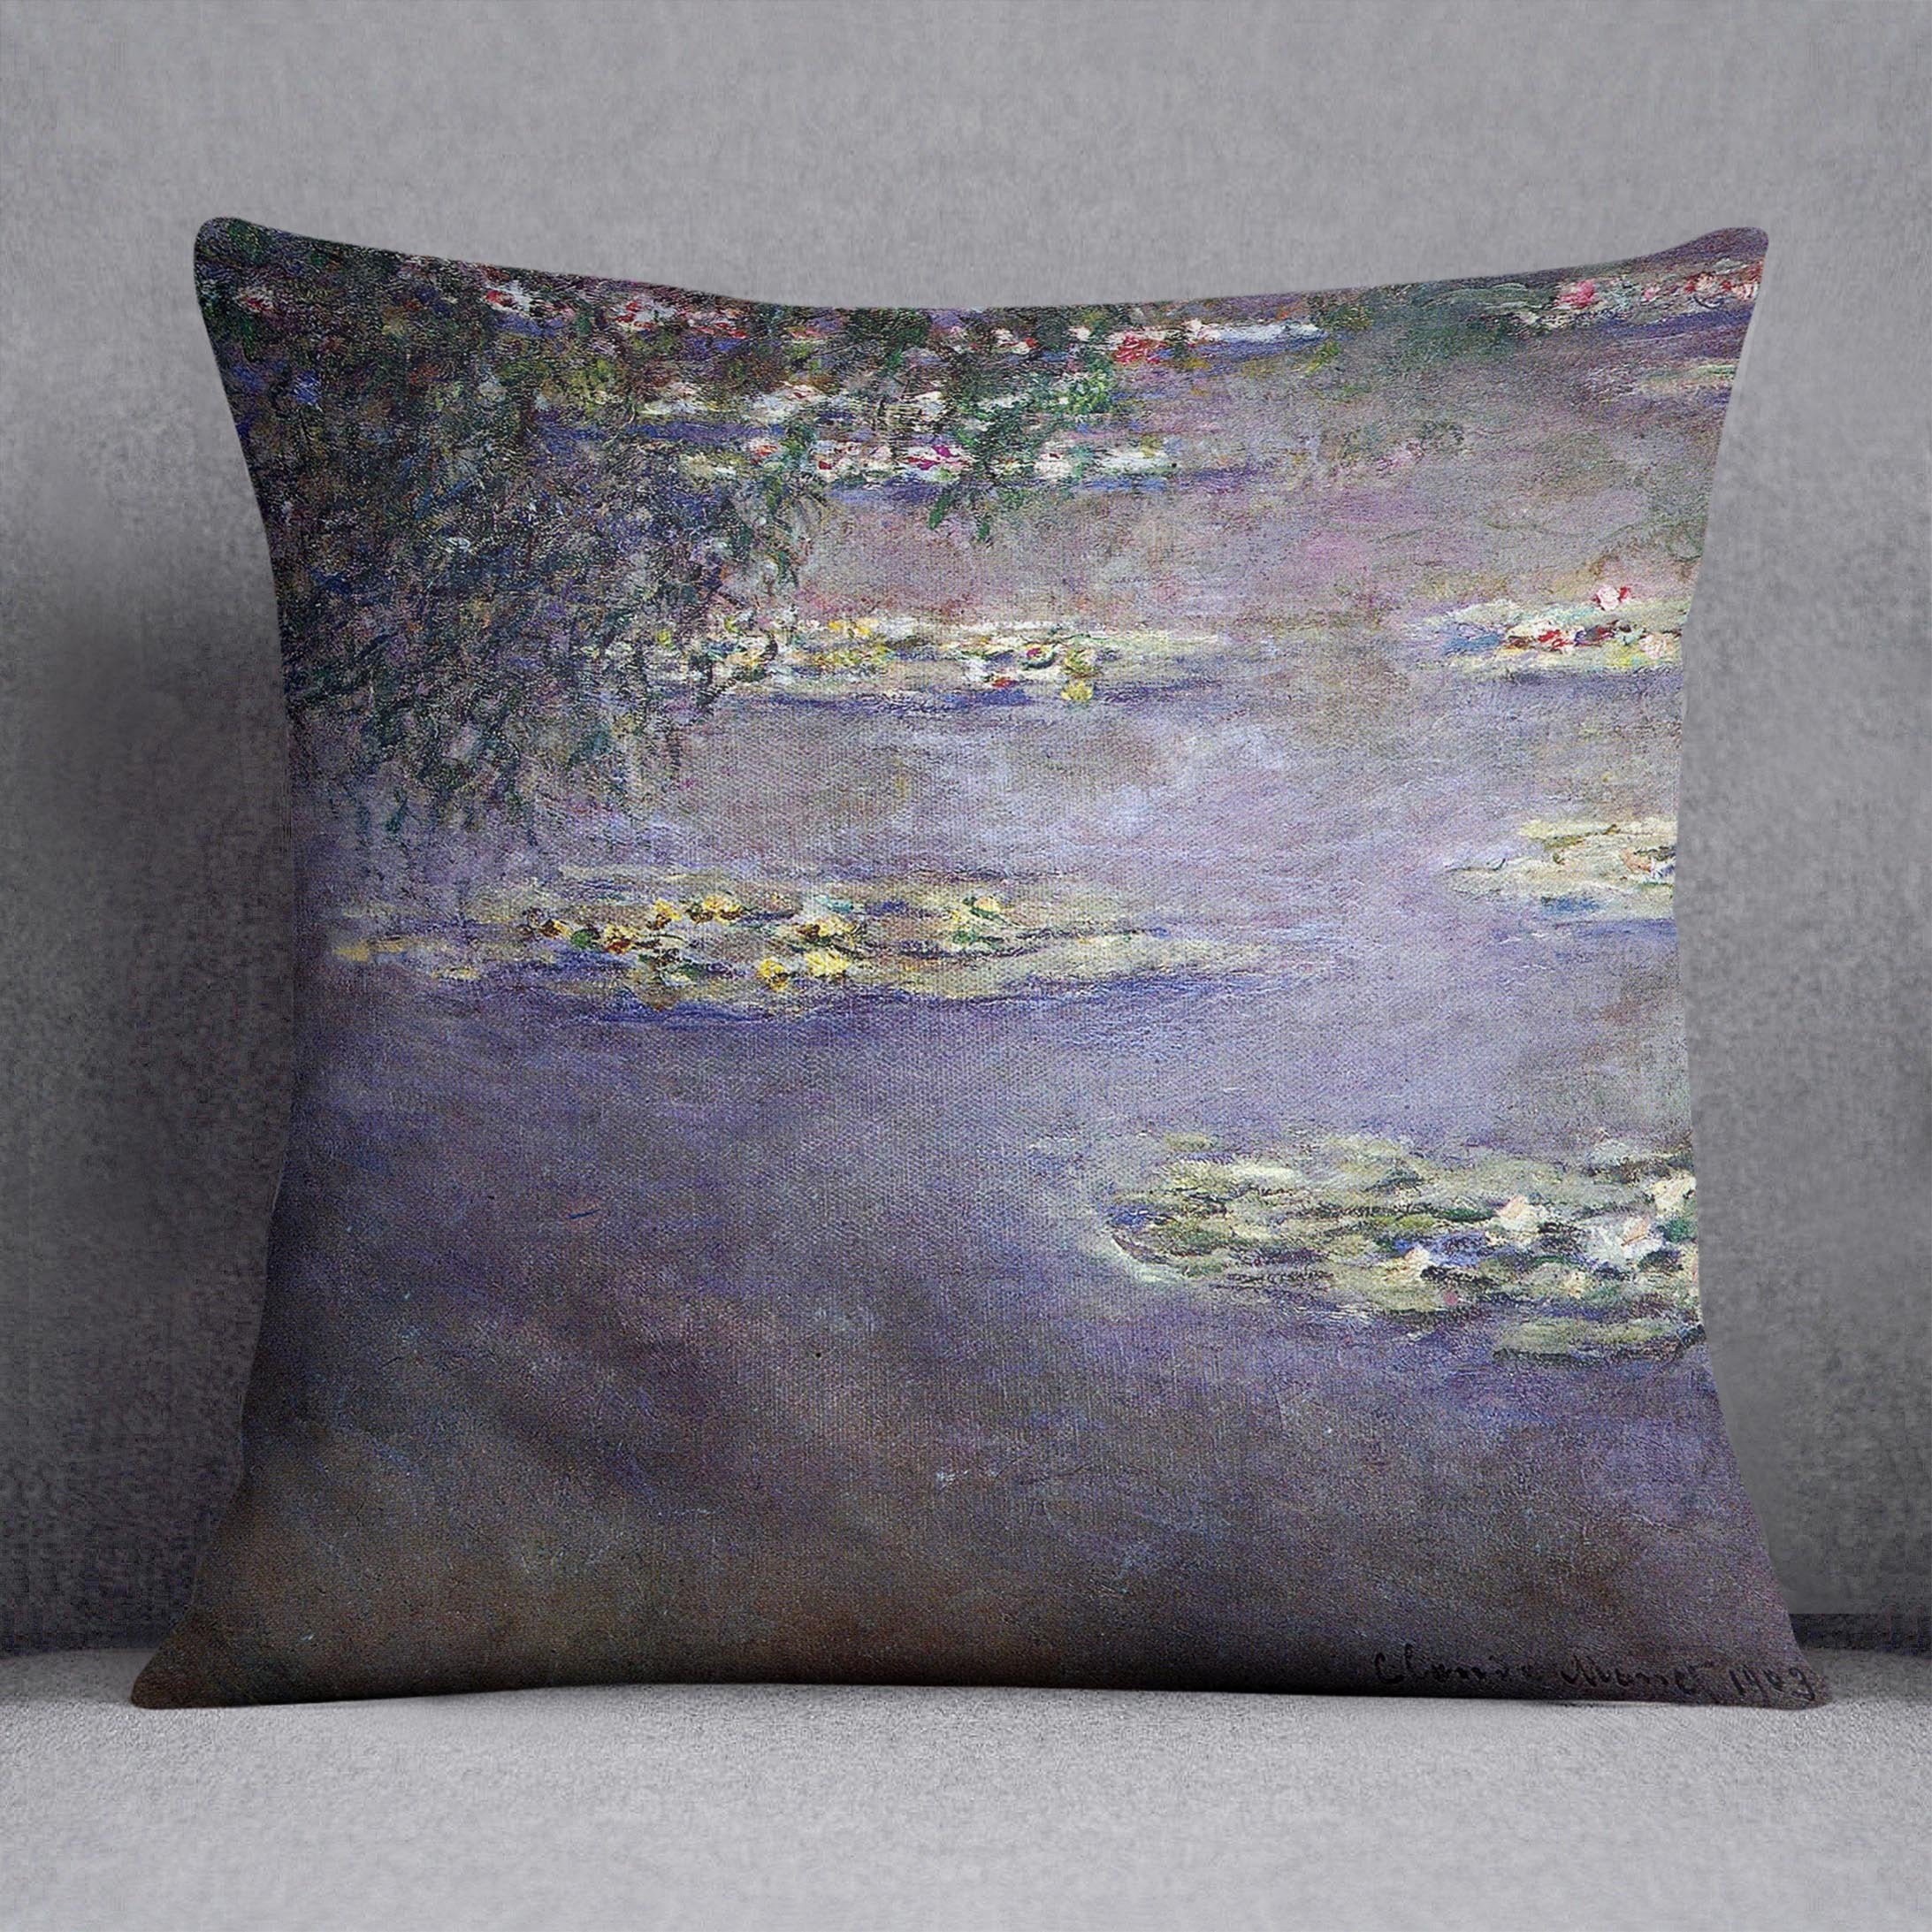 Water lilies water landscape 1 by Monet Throw Pillow